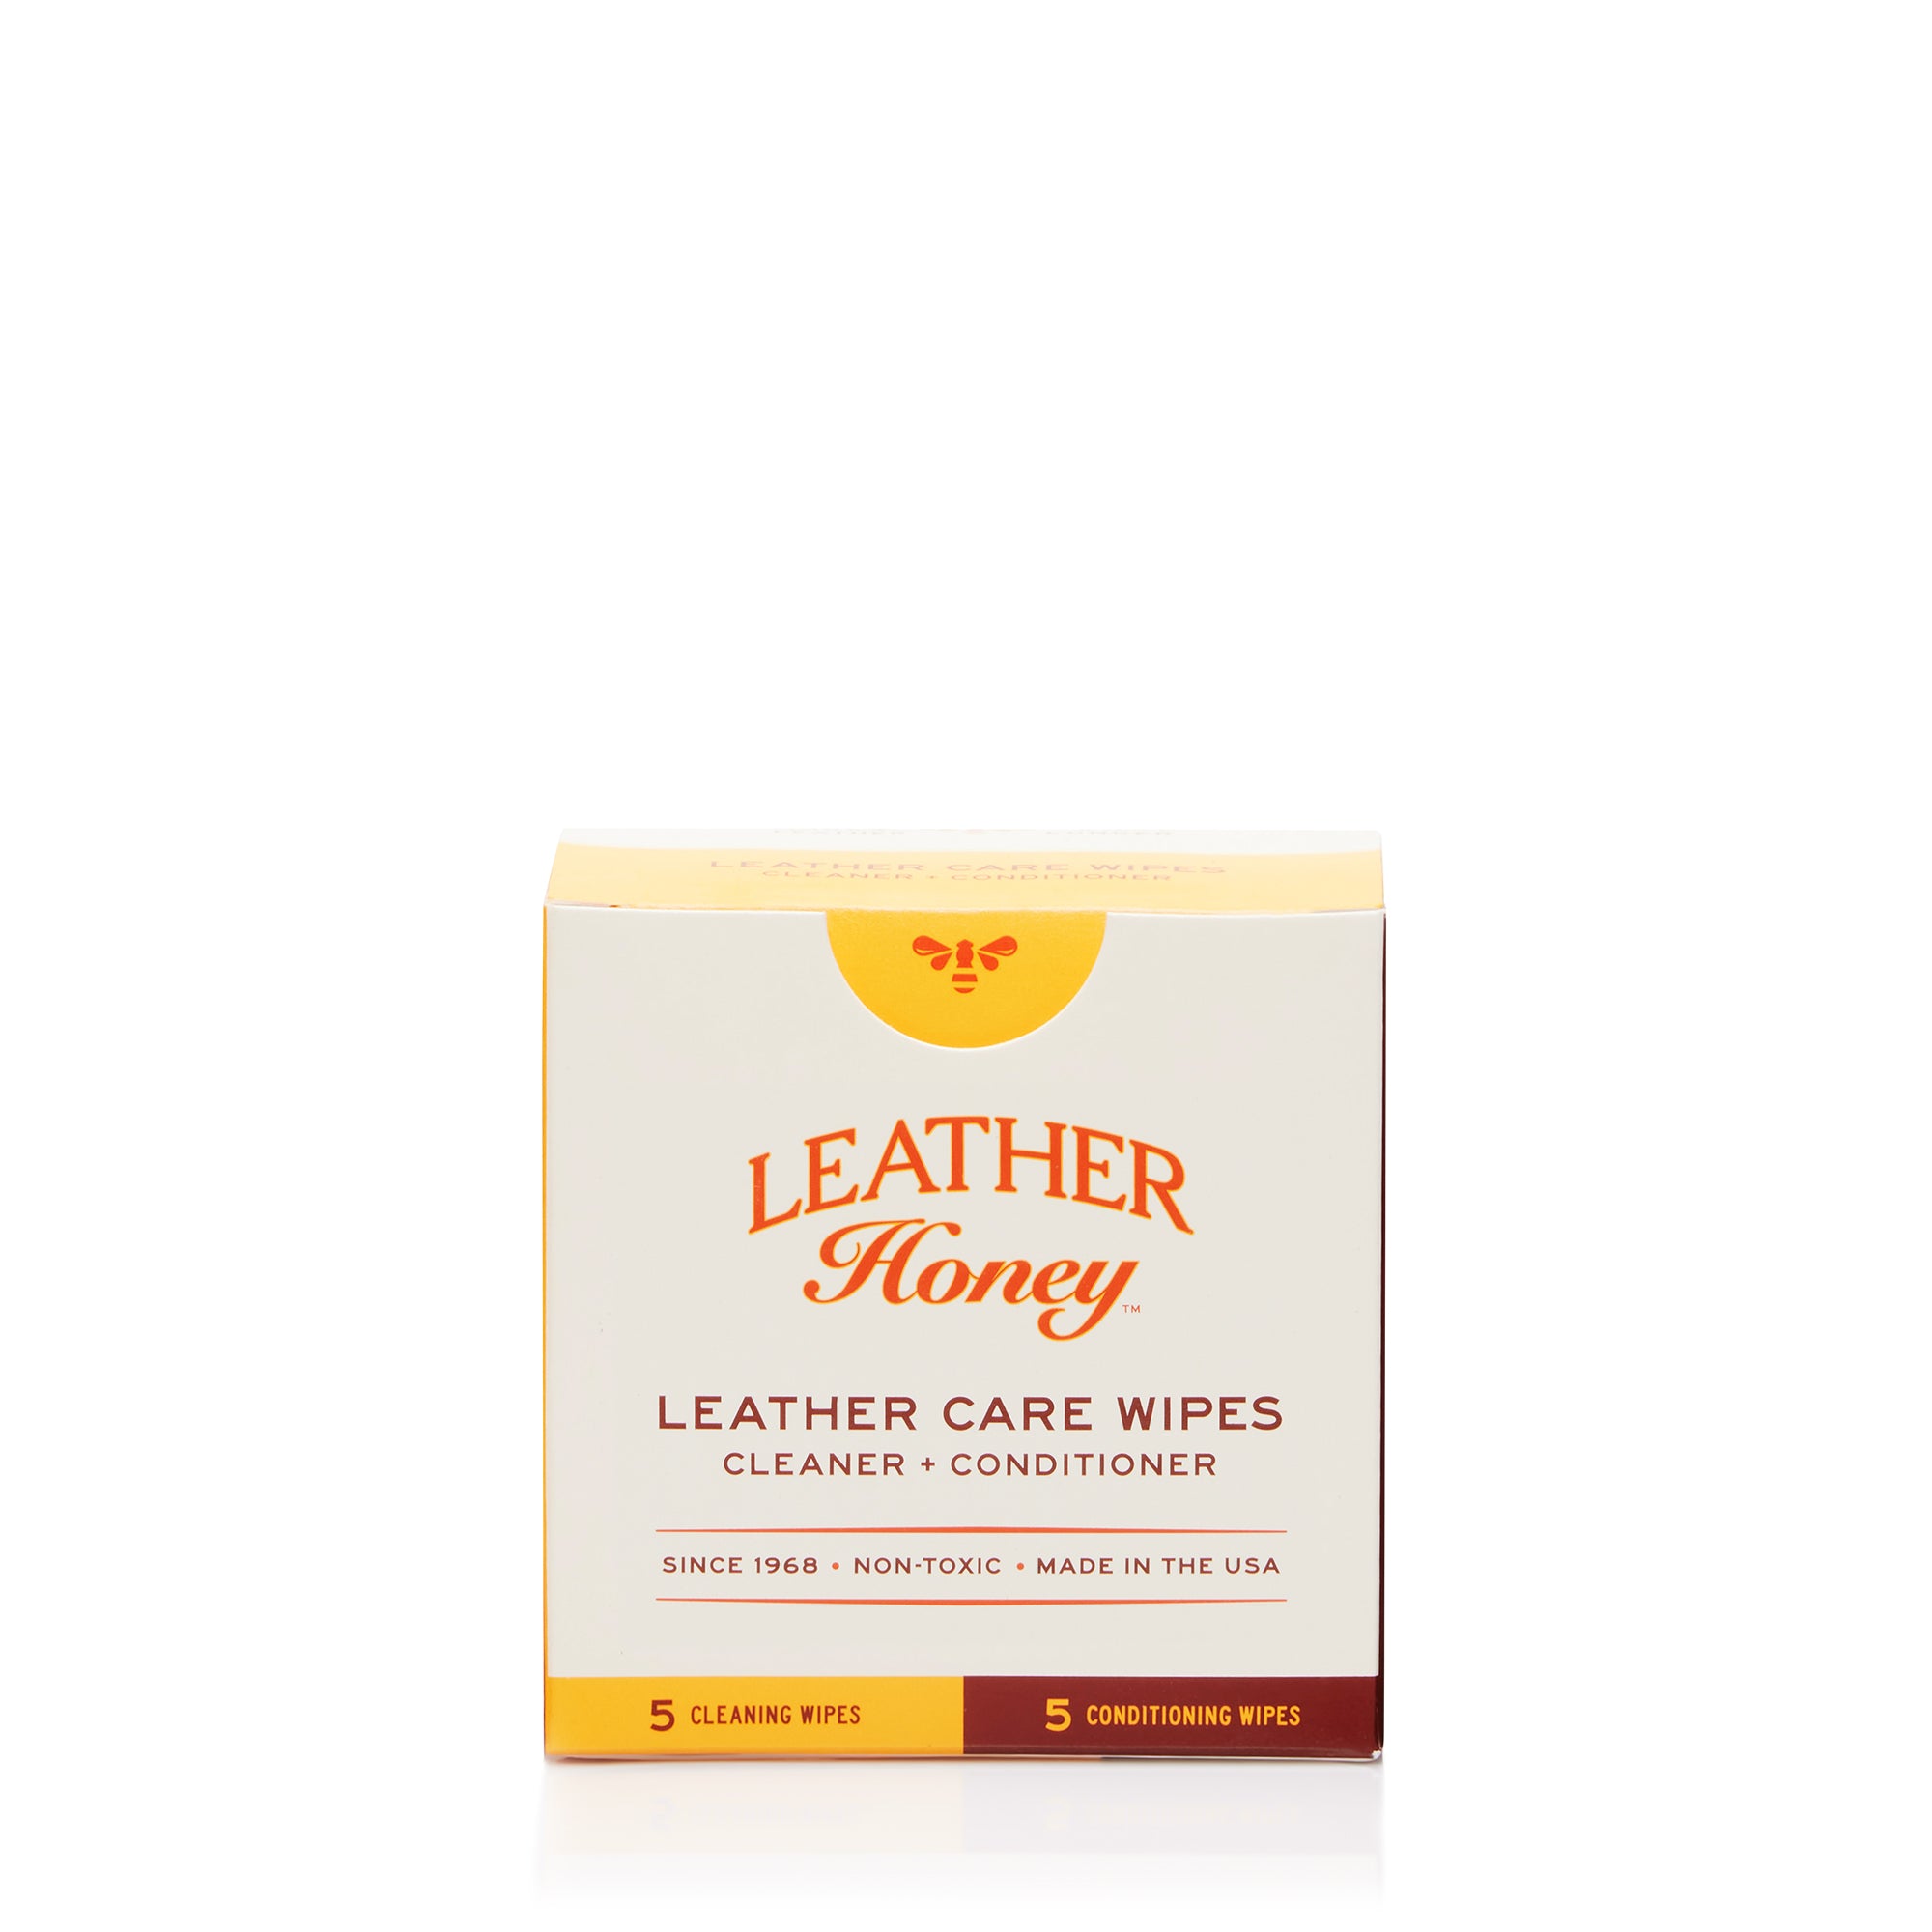 JJ CARE Leather Wipes Premium Quality - Lemon Scent - 3 Pack (120 Wipes), NEW